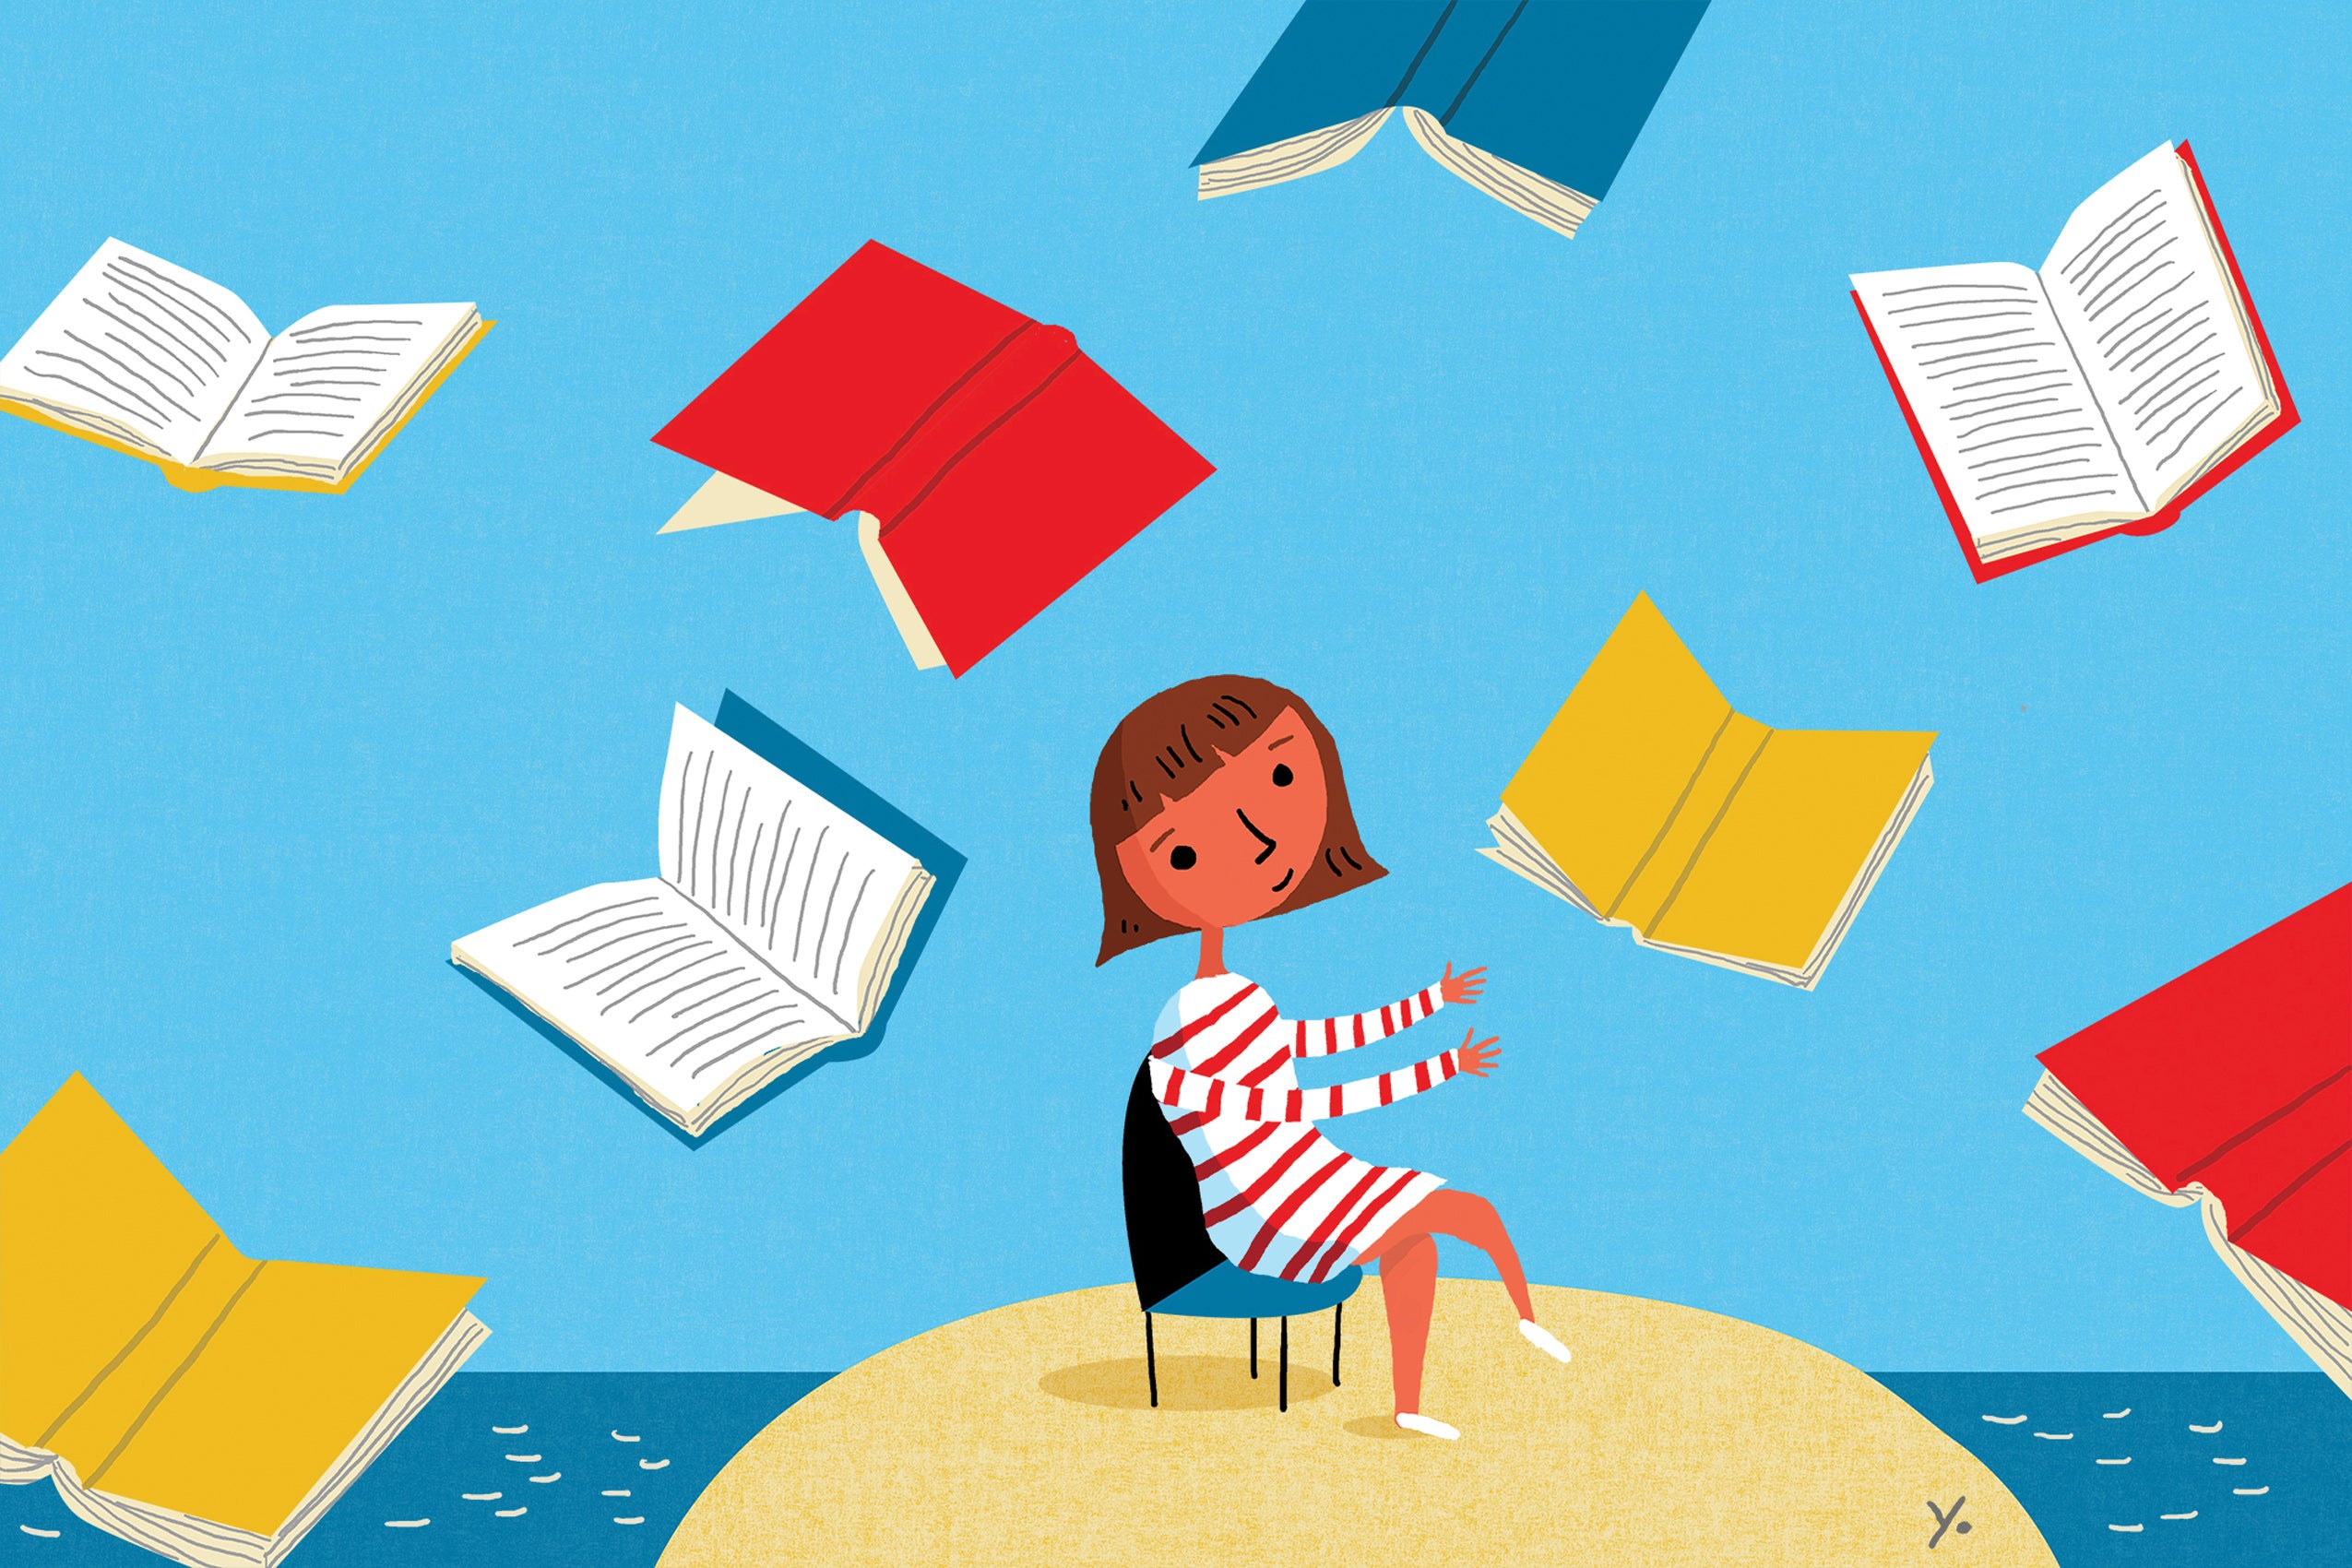 An illustration of a young woman sitting on a sandbar trying to catch a book as many colorful books fall from the sky